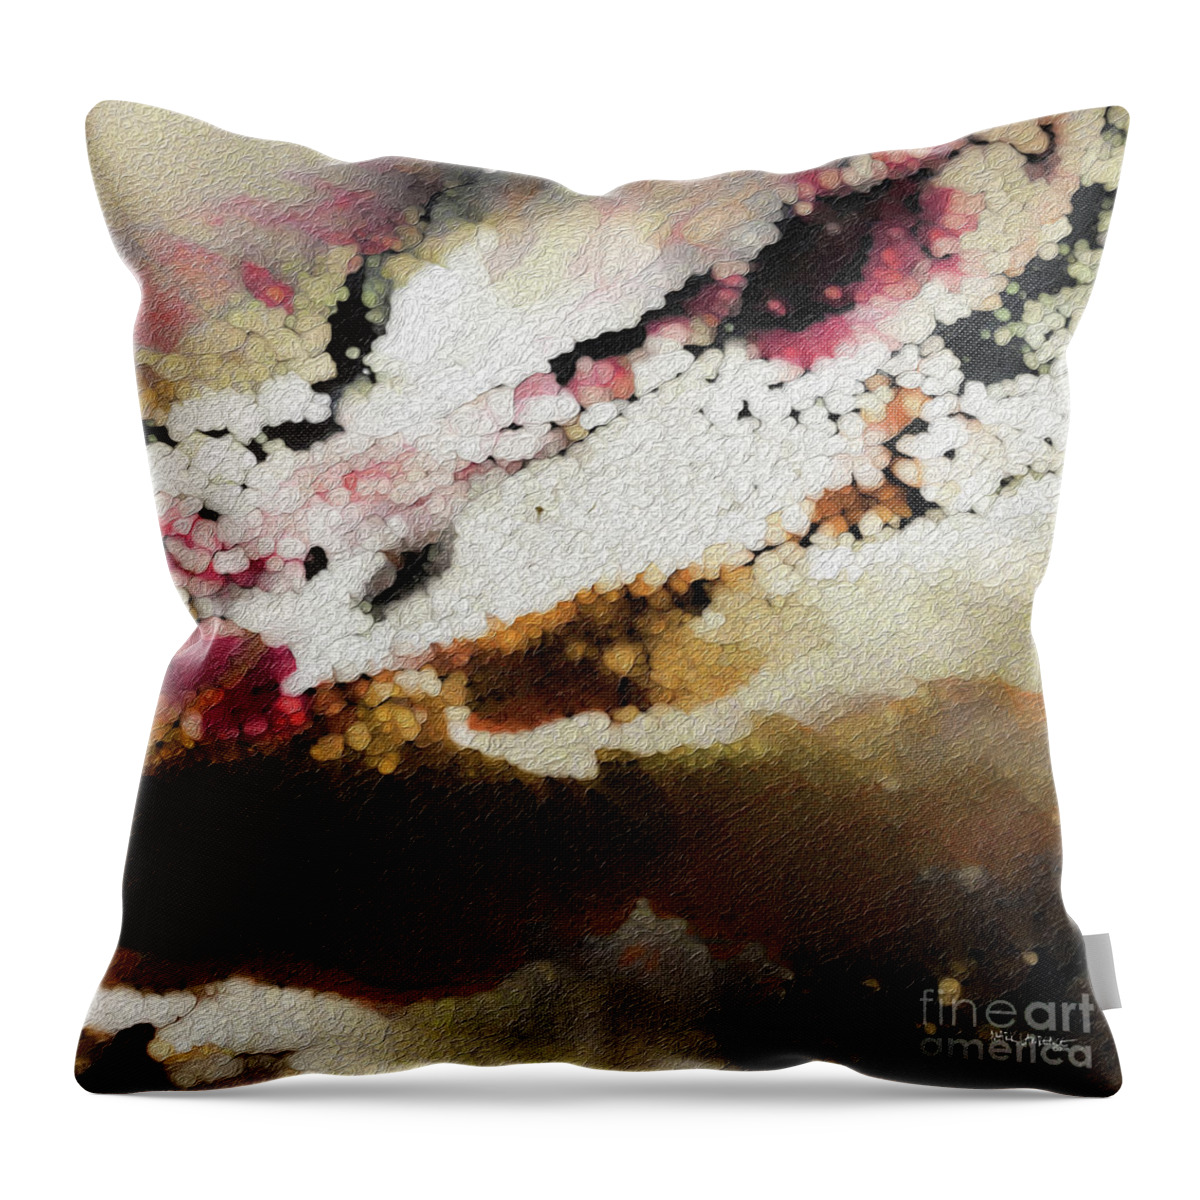 Red Throw Pillow featuring the painting Proverbs 21 21. The Greatest Pursuit of All by Mark Lawrence